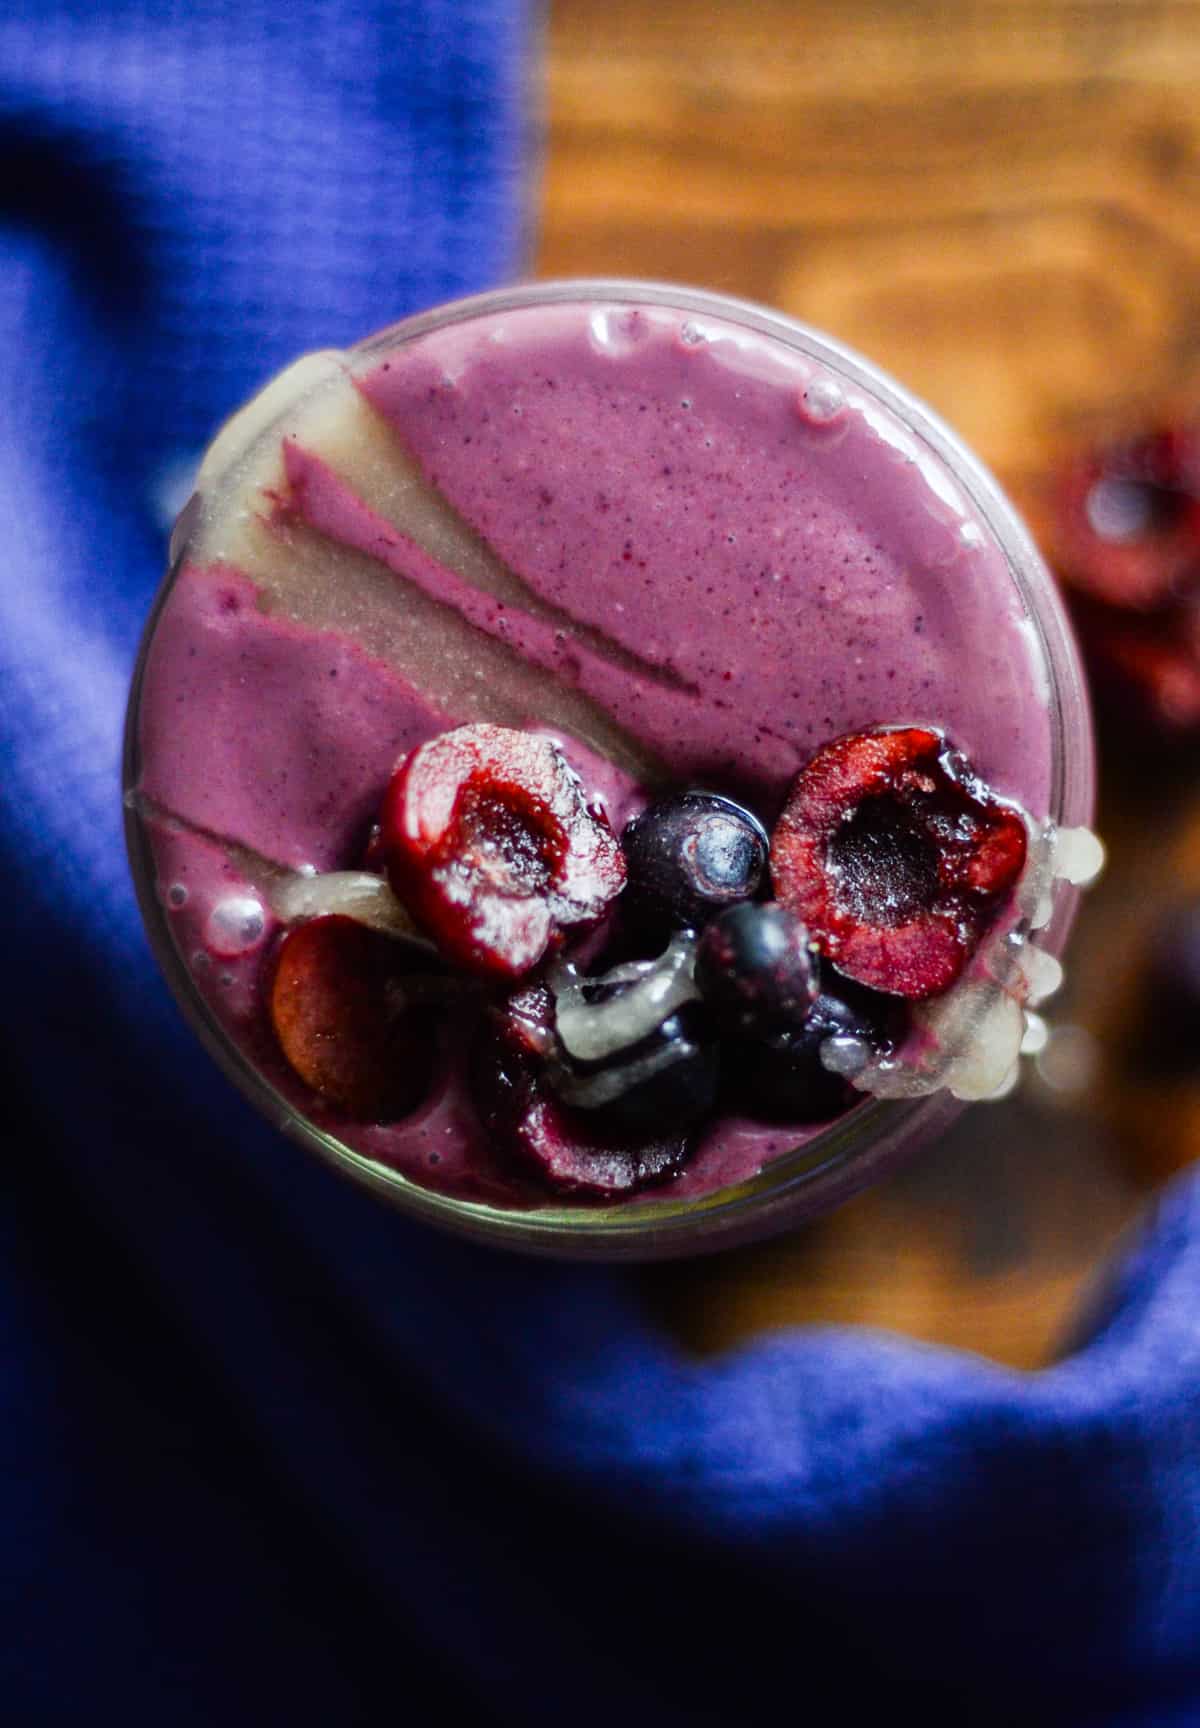 A purple smoothie in a glass with honey, halved cherries, and blueberries on top.